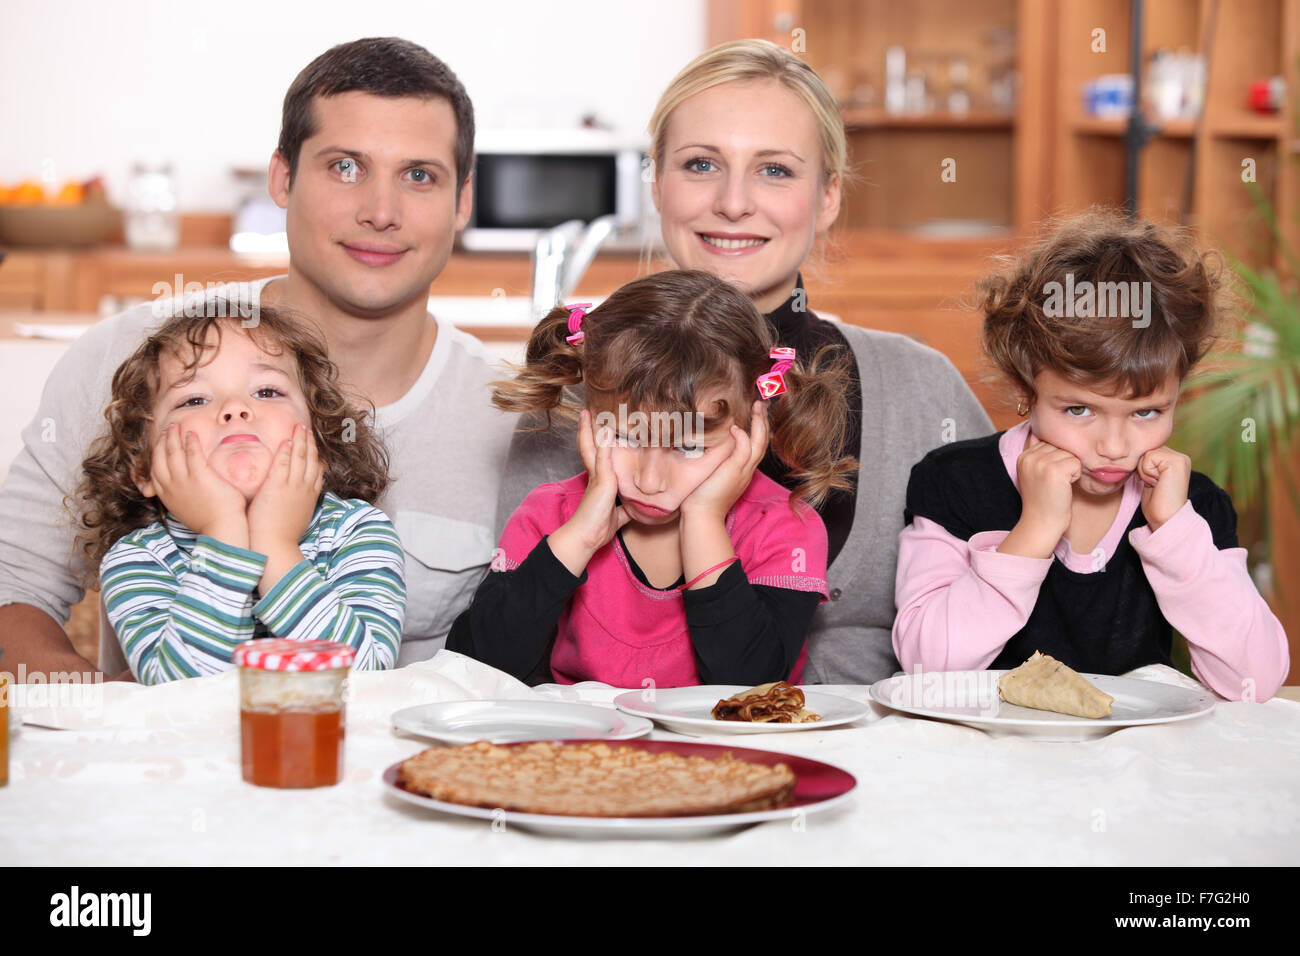 Sulky children with pancakes Stock Photo